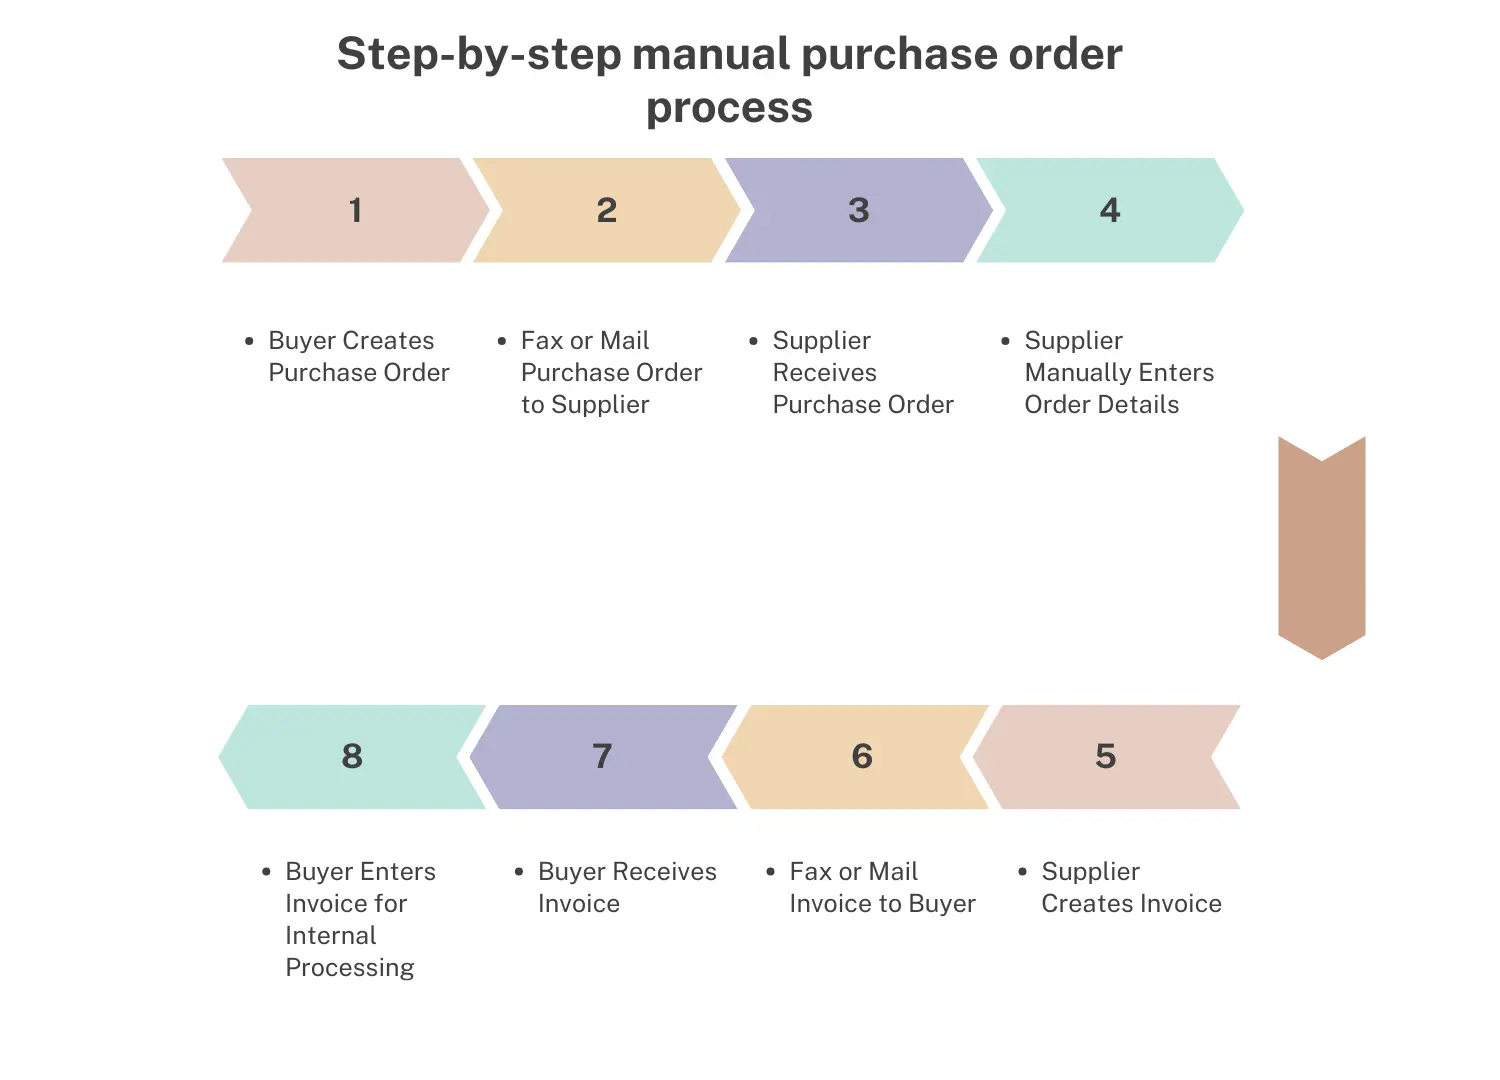 Manual purchase order process